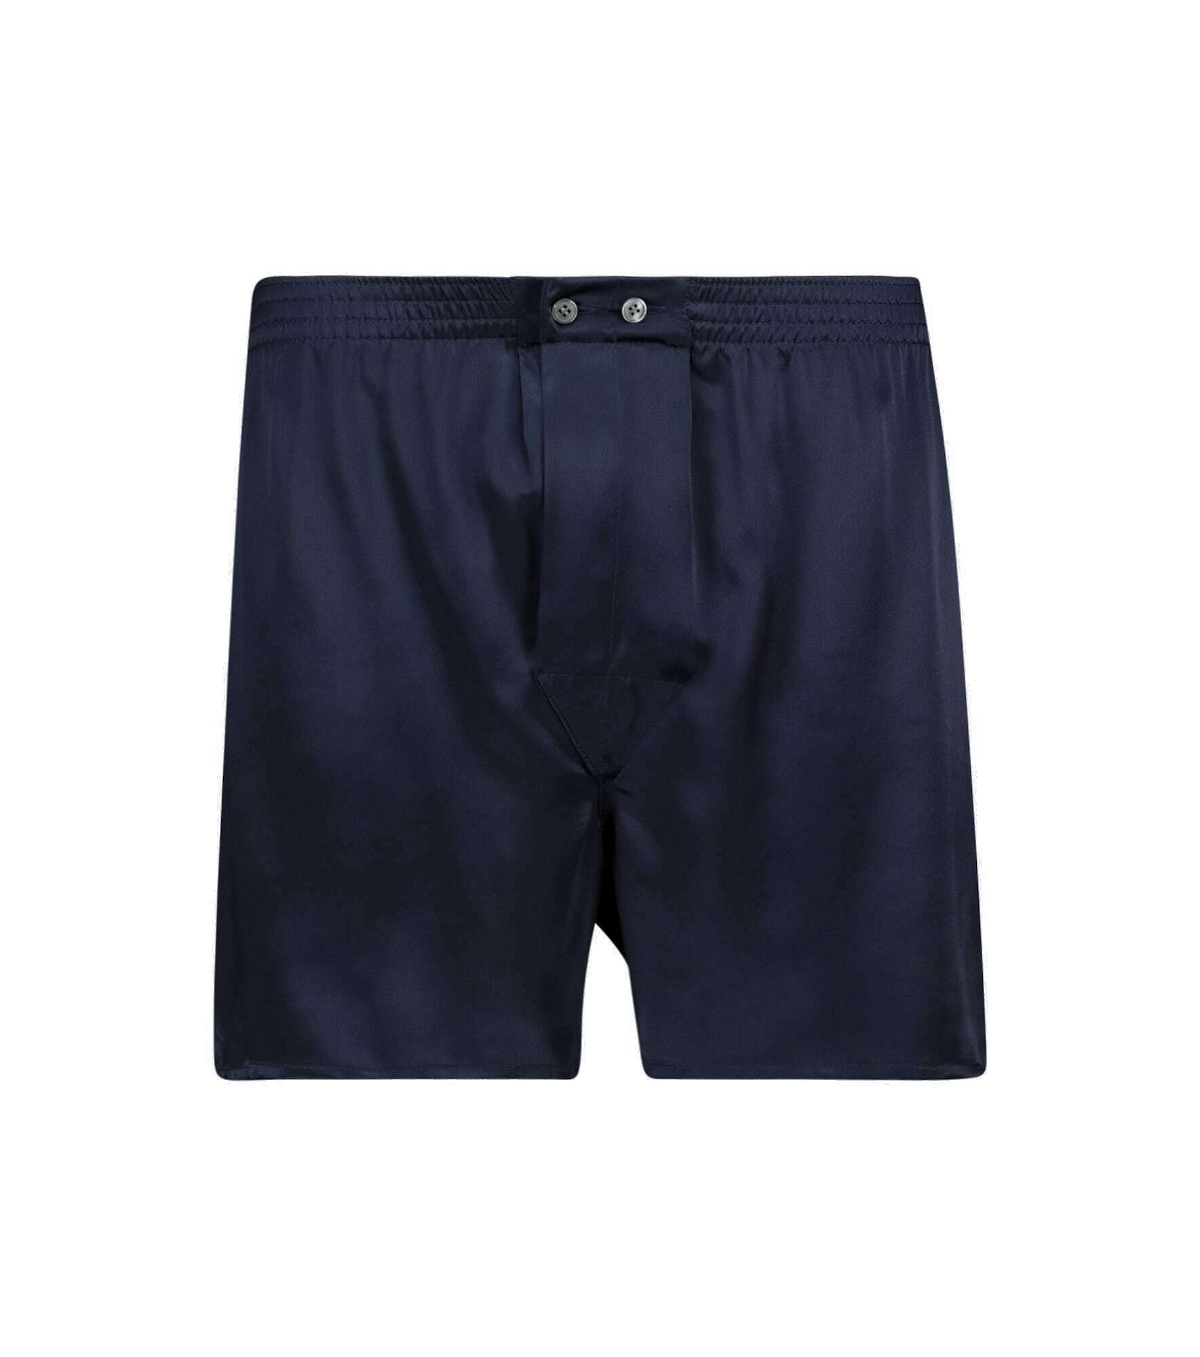 Regular Fit Printed Blue Cotton Boxer Shorts at Rs 225/piece in